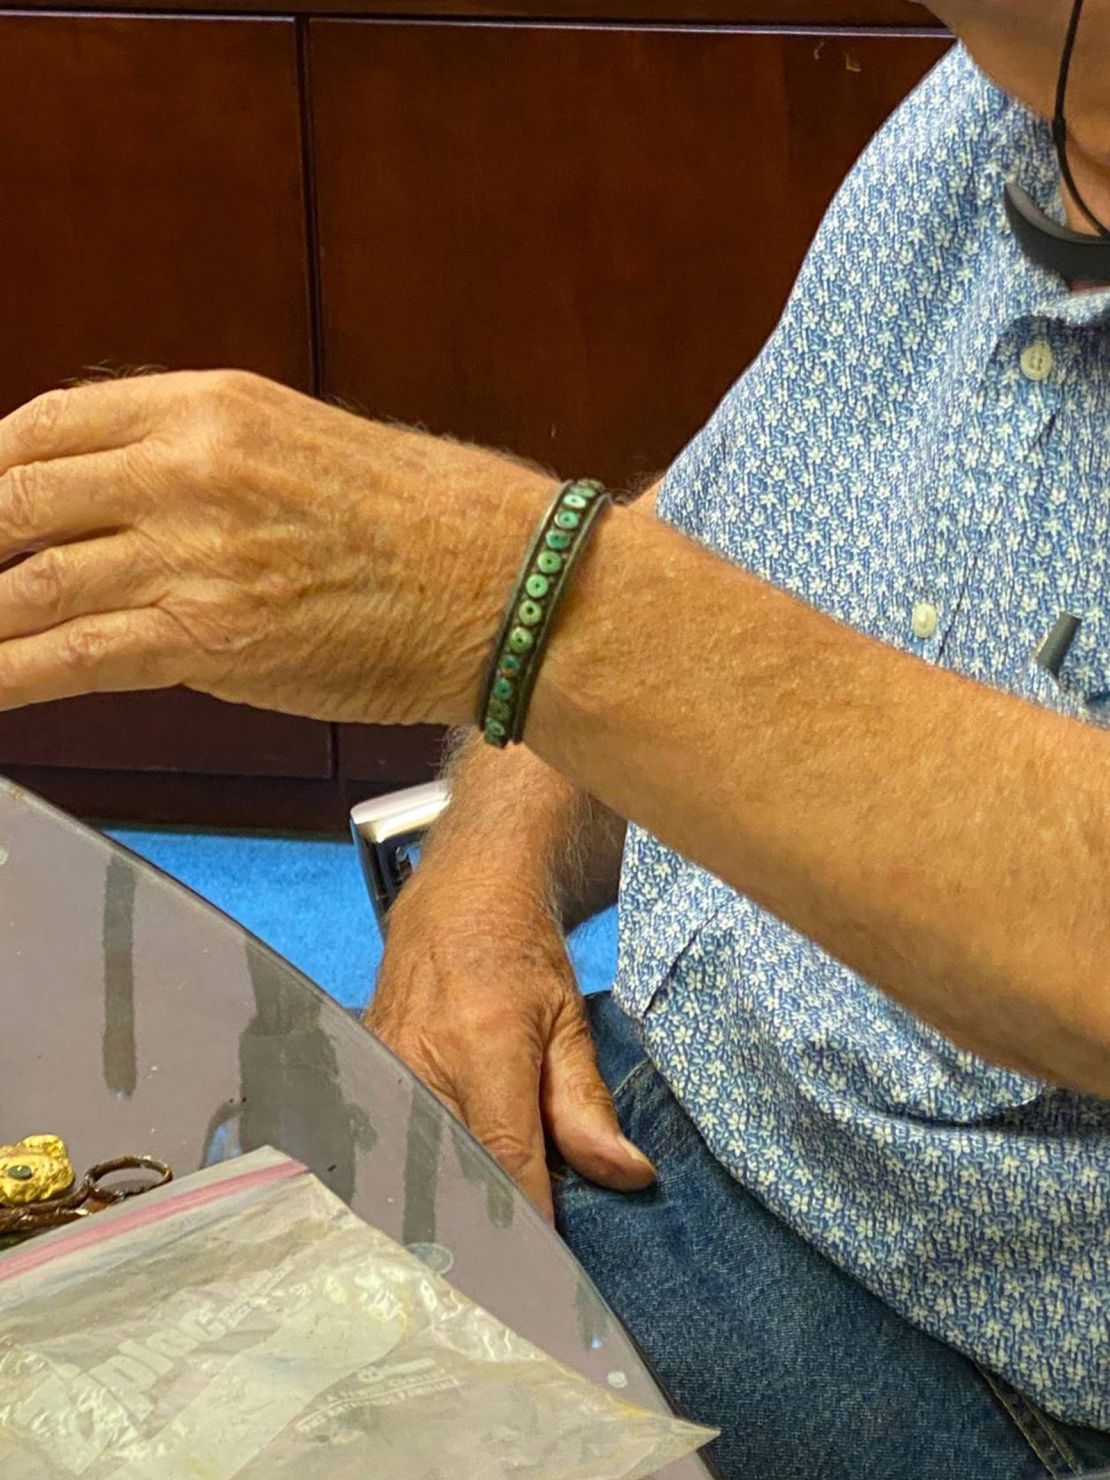 Fenn wearing a bracelet made of silver, which has been tarnished black. 